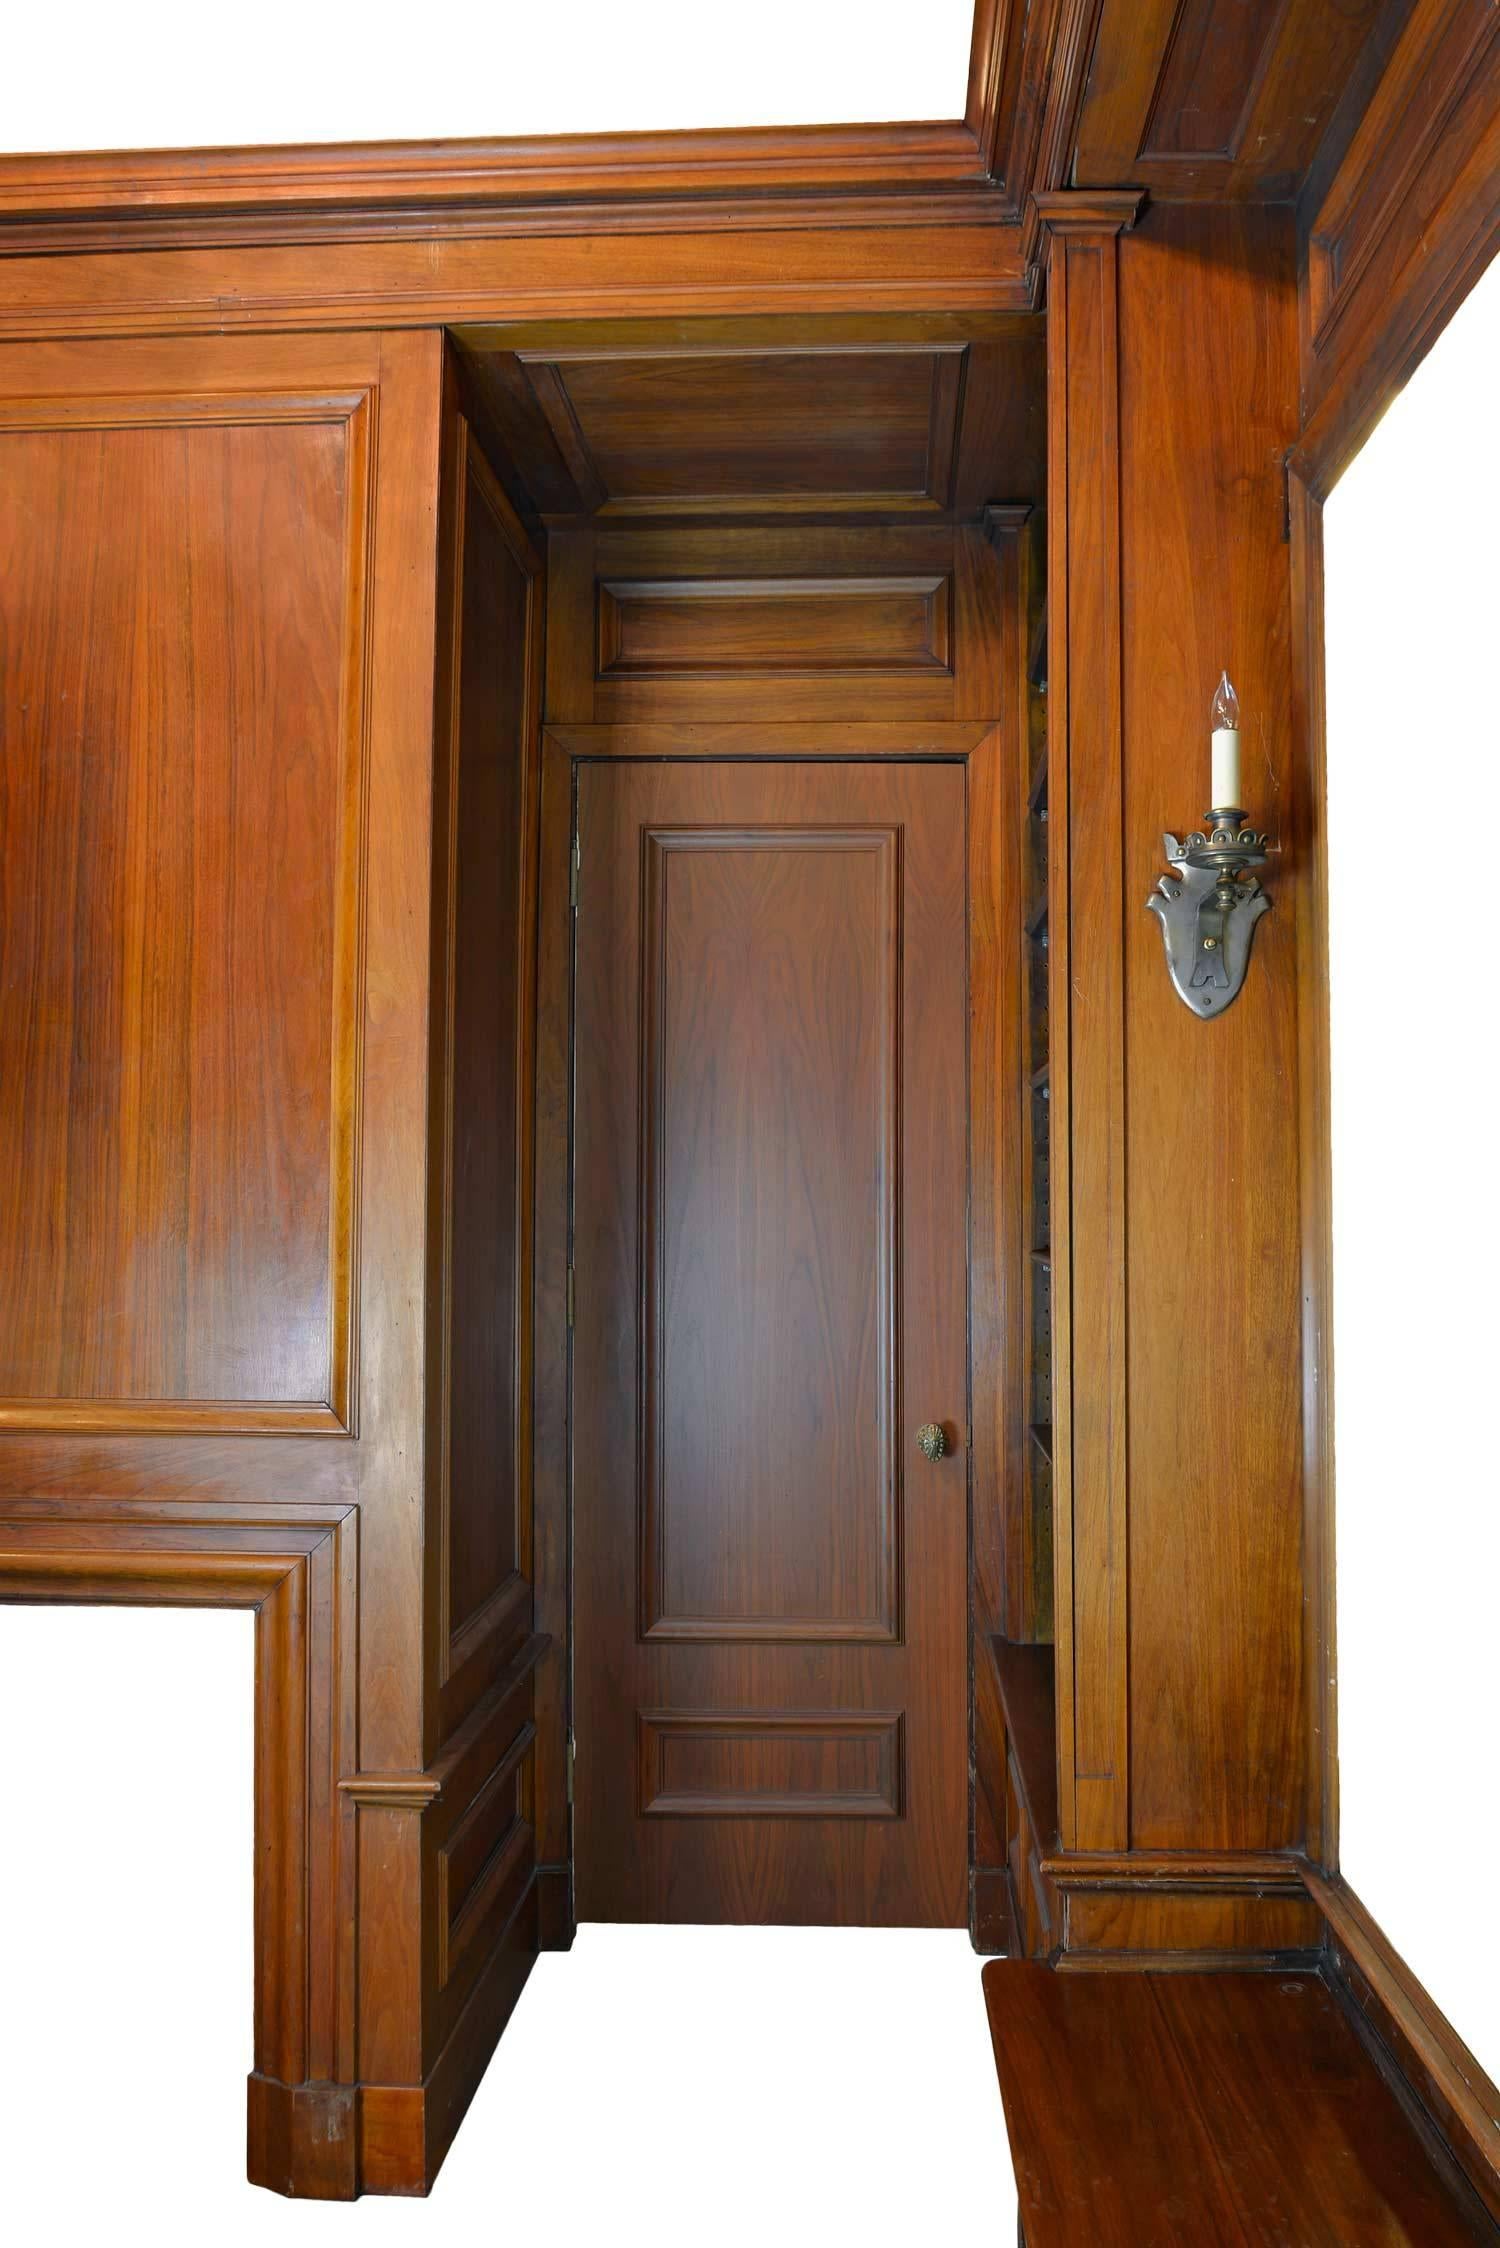 The warmth of walnut surrounds you in the special little room from a home designed by George Washington Maher in Kenilworth, Illinois. The city was Maher's long time home and was built in 1921- towards the end of his career. This room was